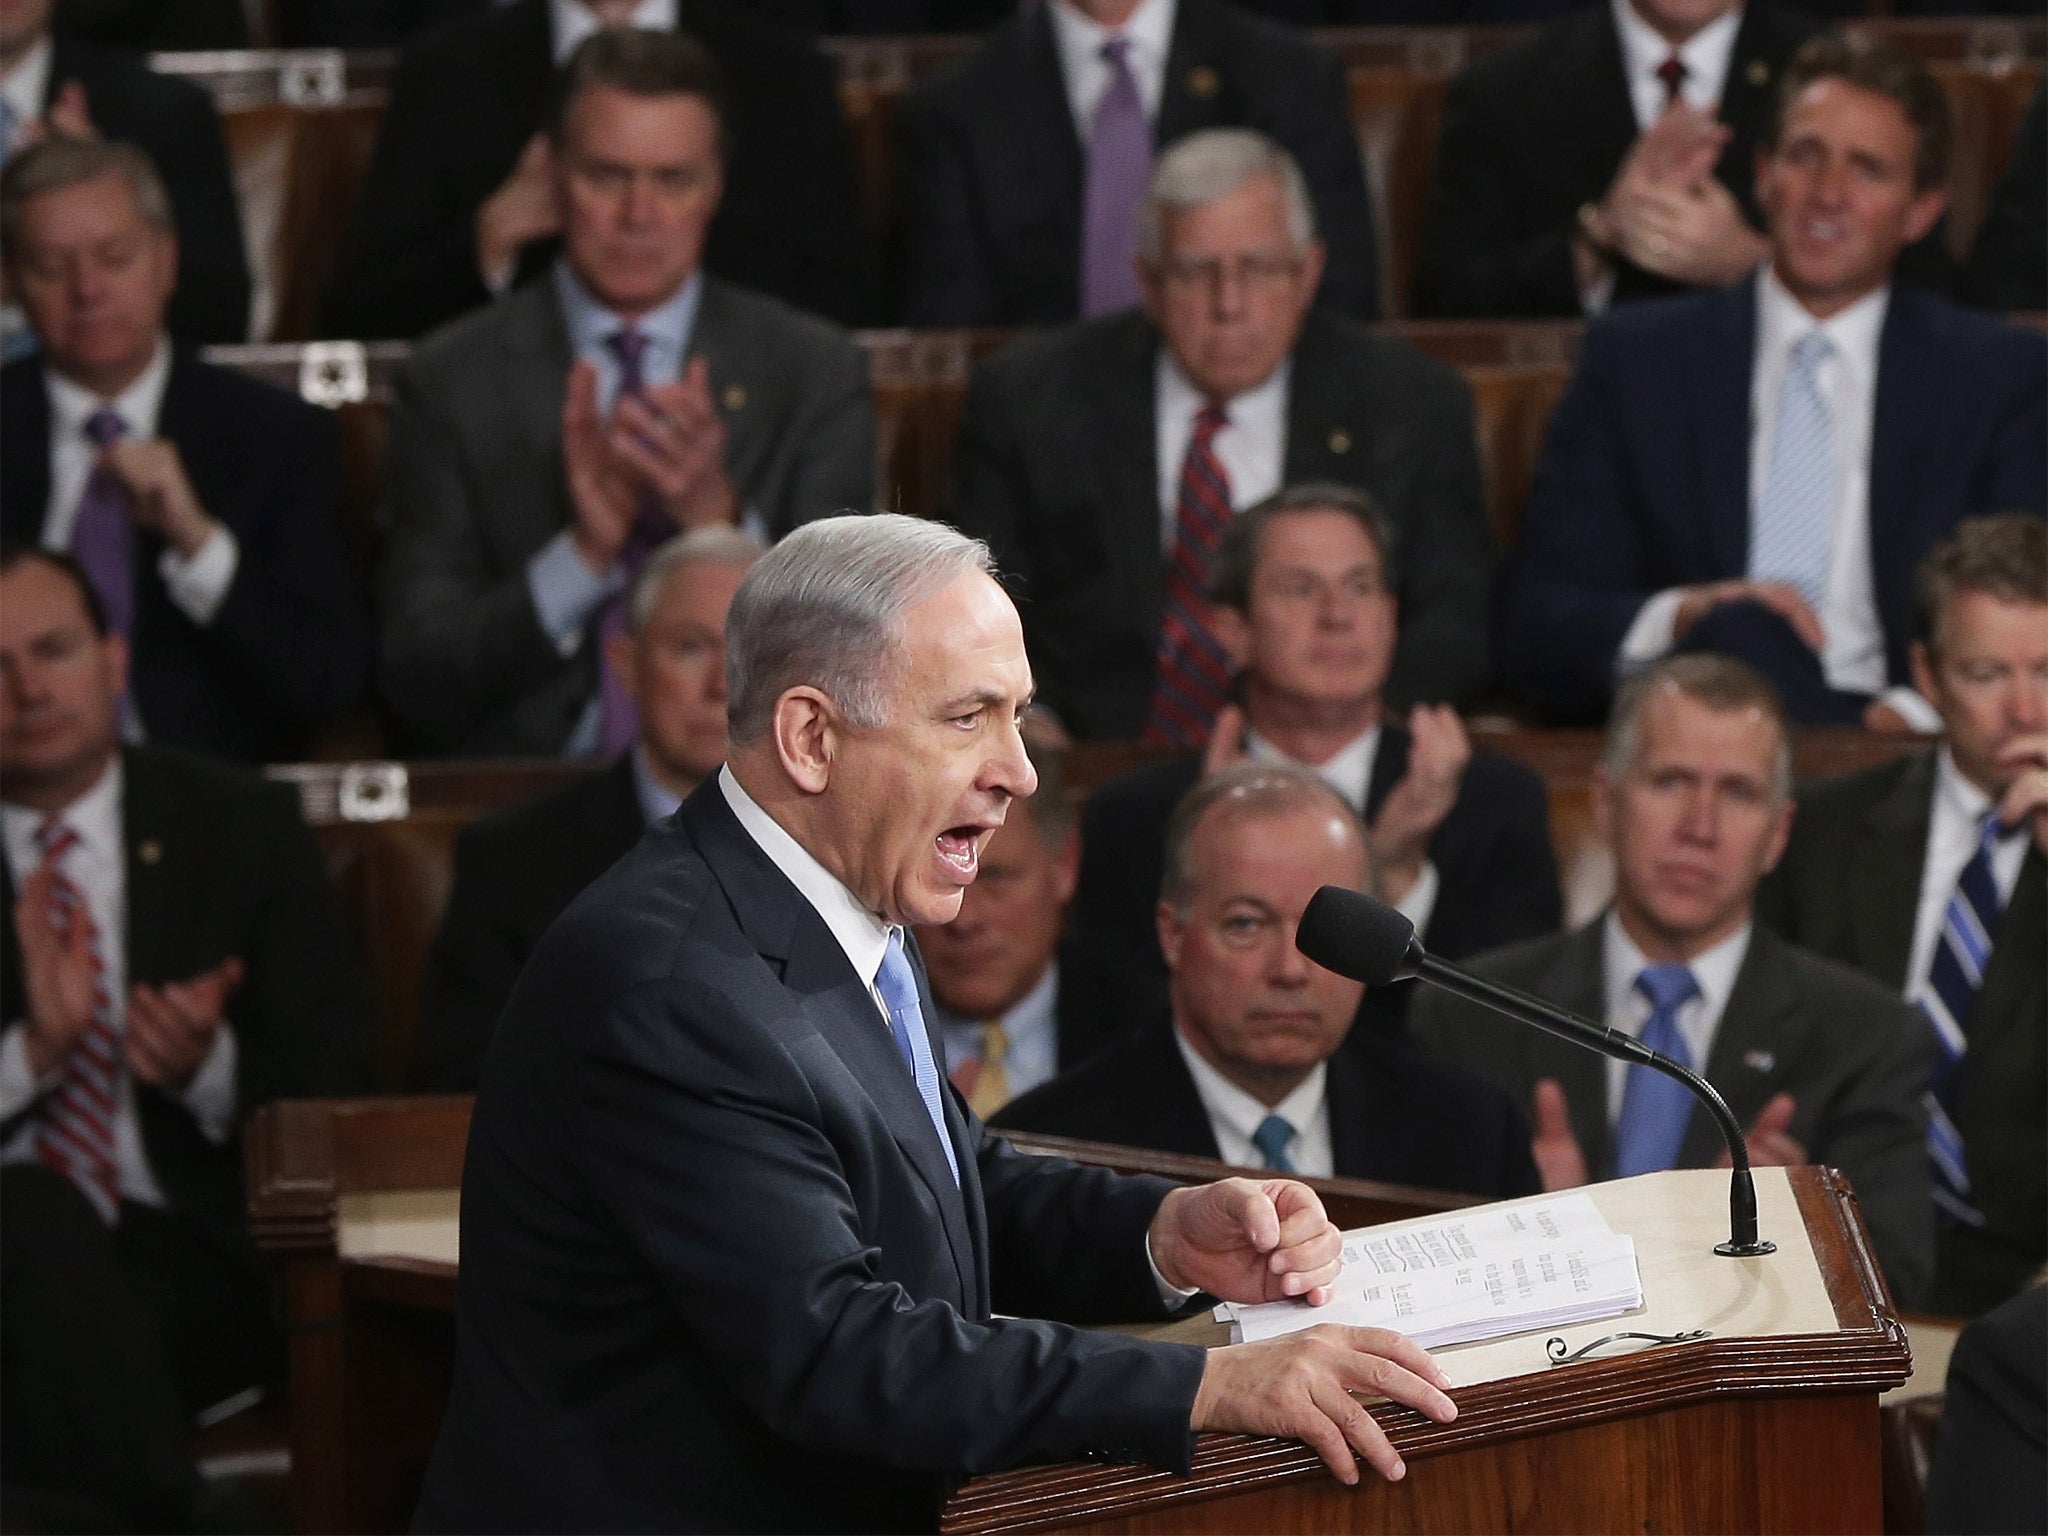 The Israeli Prime Minister spoke at US Congress on Tuesday